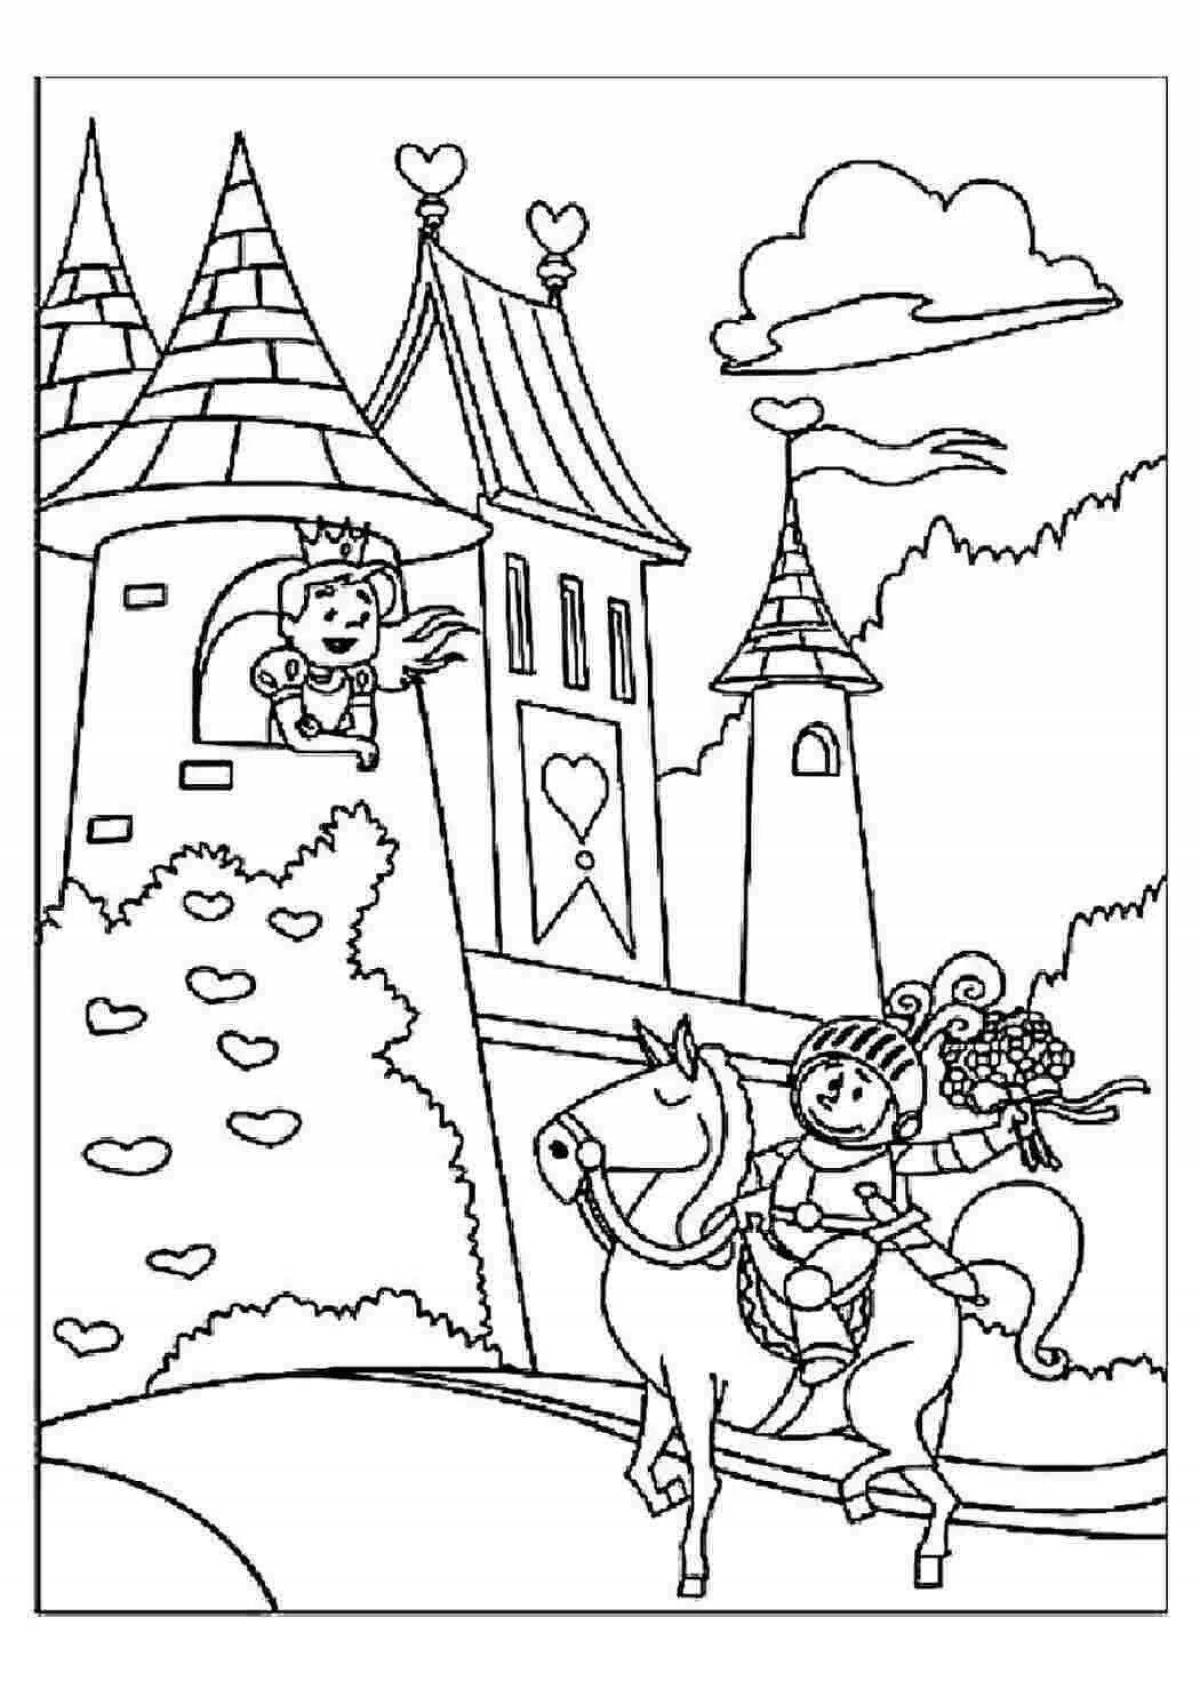 Exalted princess knight and dragon coloring page